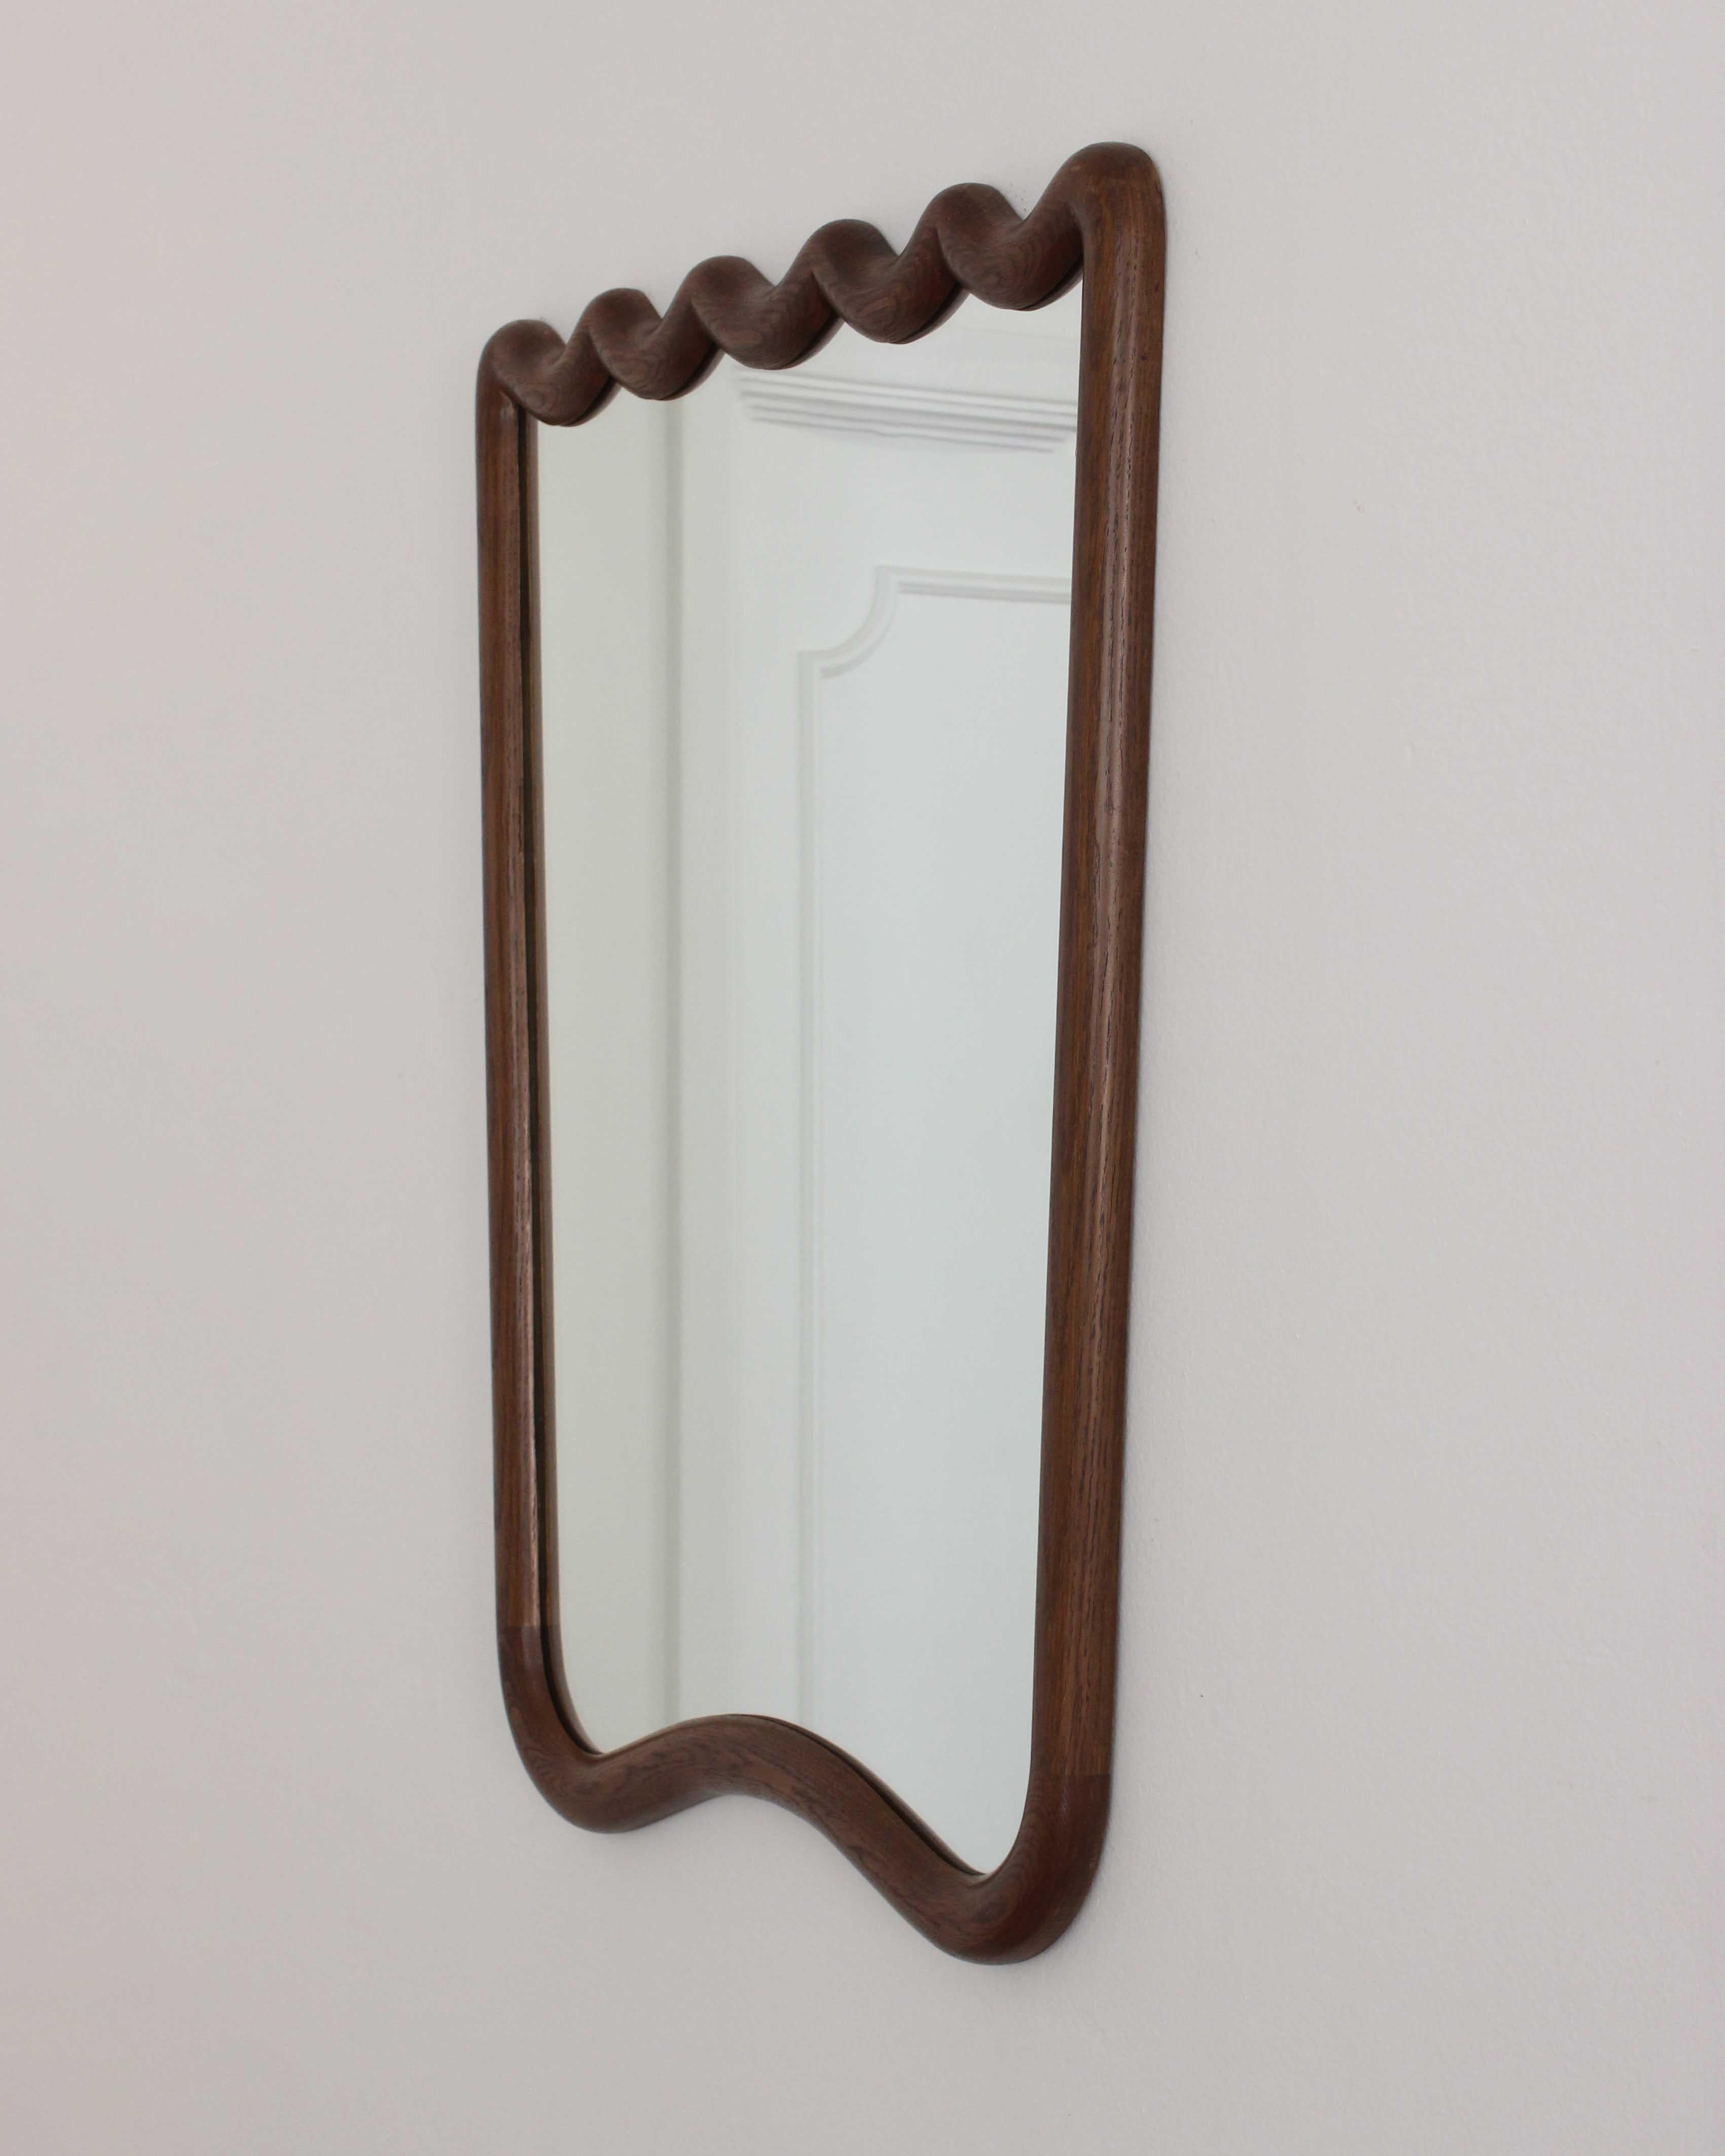 French Oak mirror inspired by vintage Italian mirror designs. 

Handmade in Los Angeles, CA. 

Custom finishes and sizes available upon request. Pricing varies.